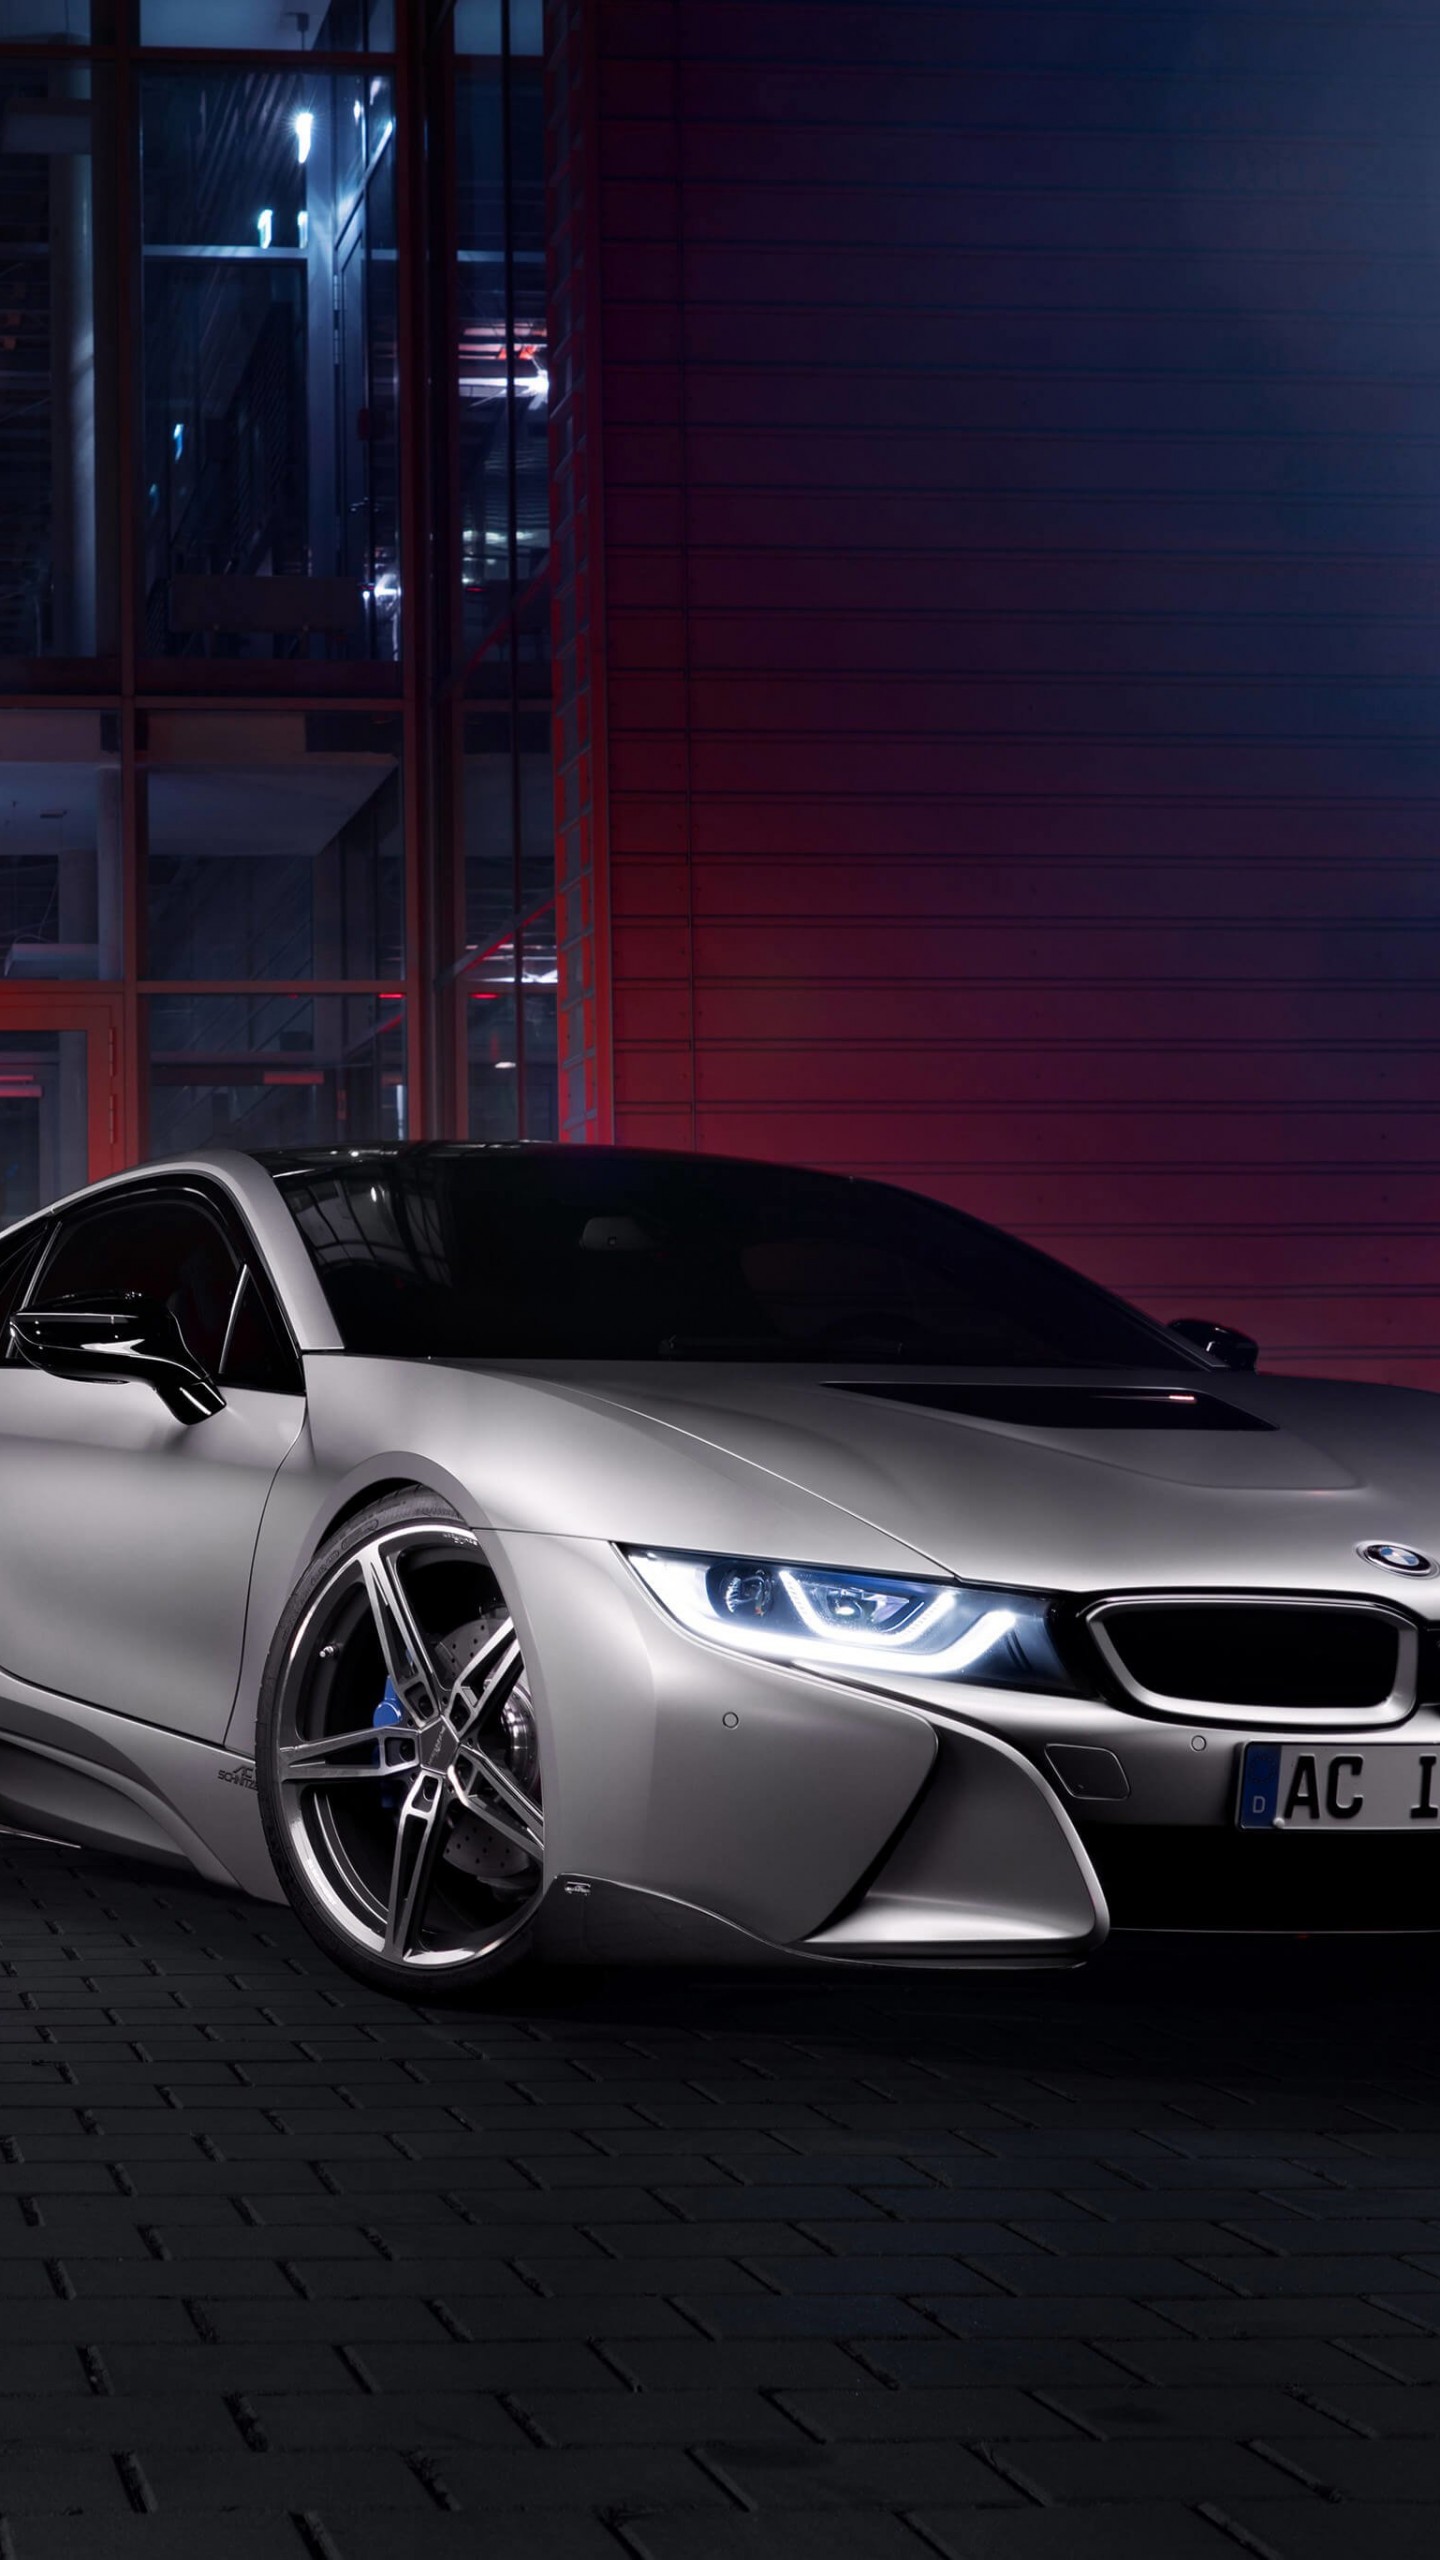 BMW i8 designed by AC Schnitzer Wallpaper for LG G3